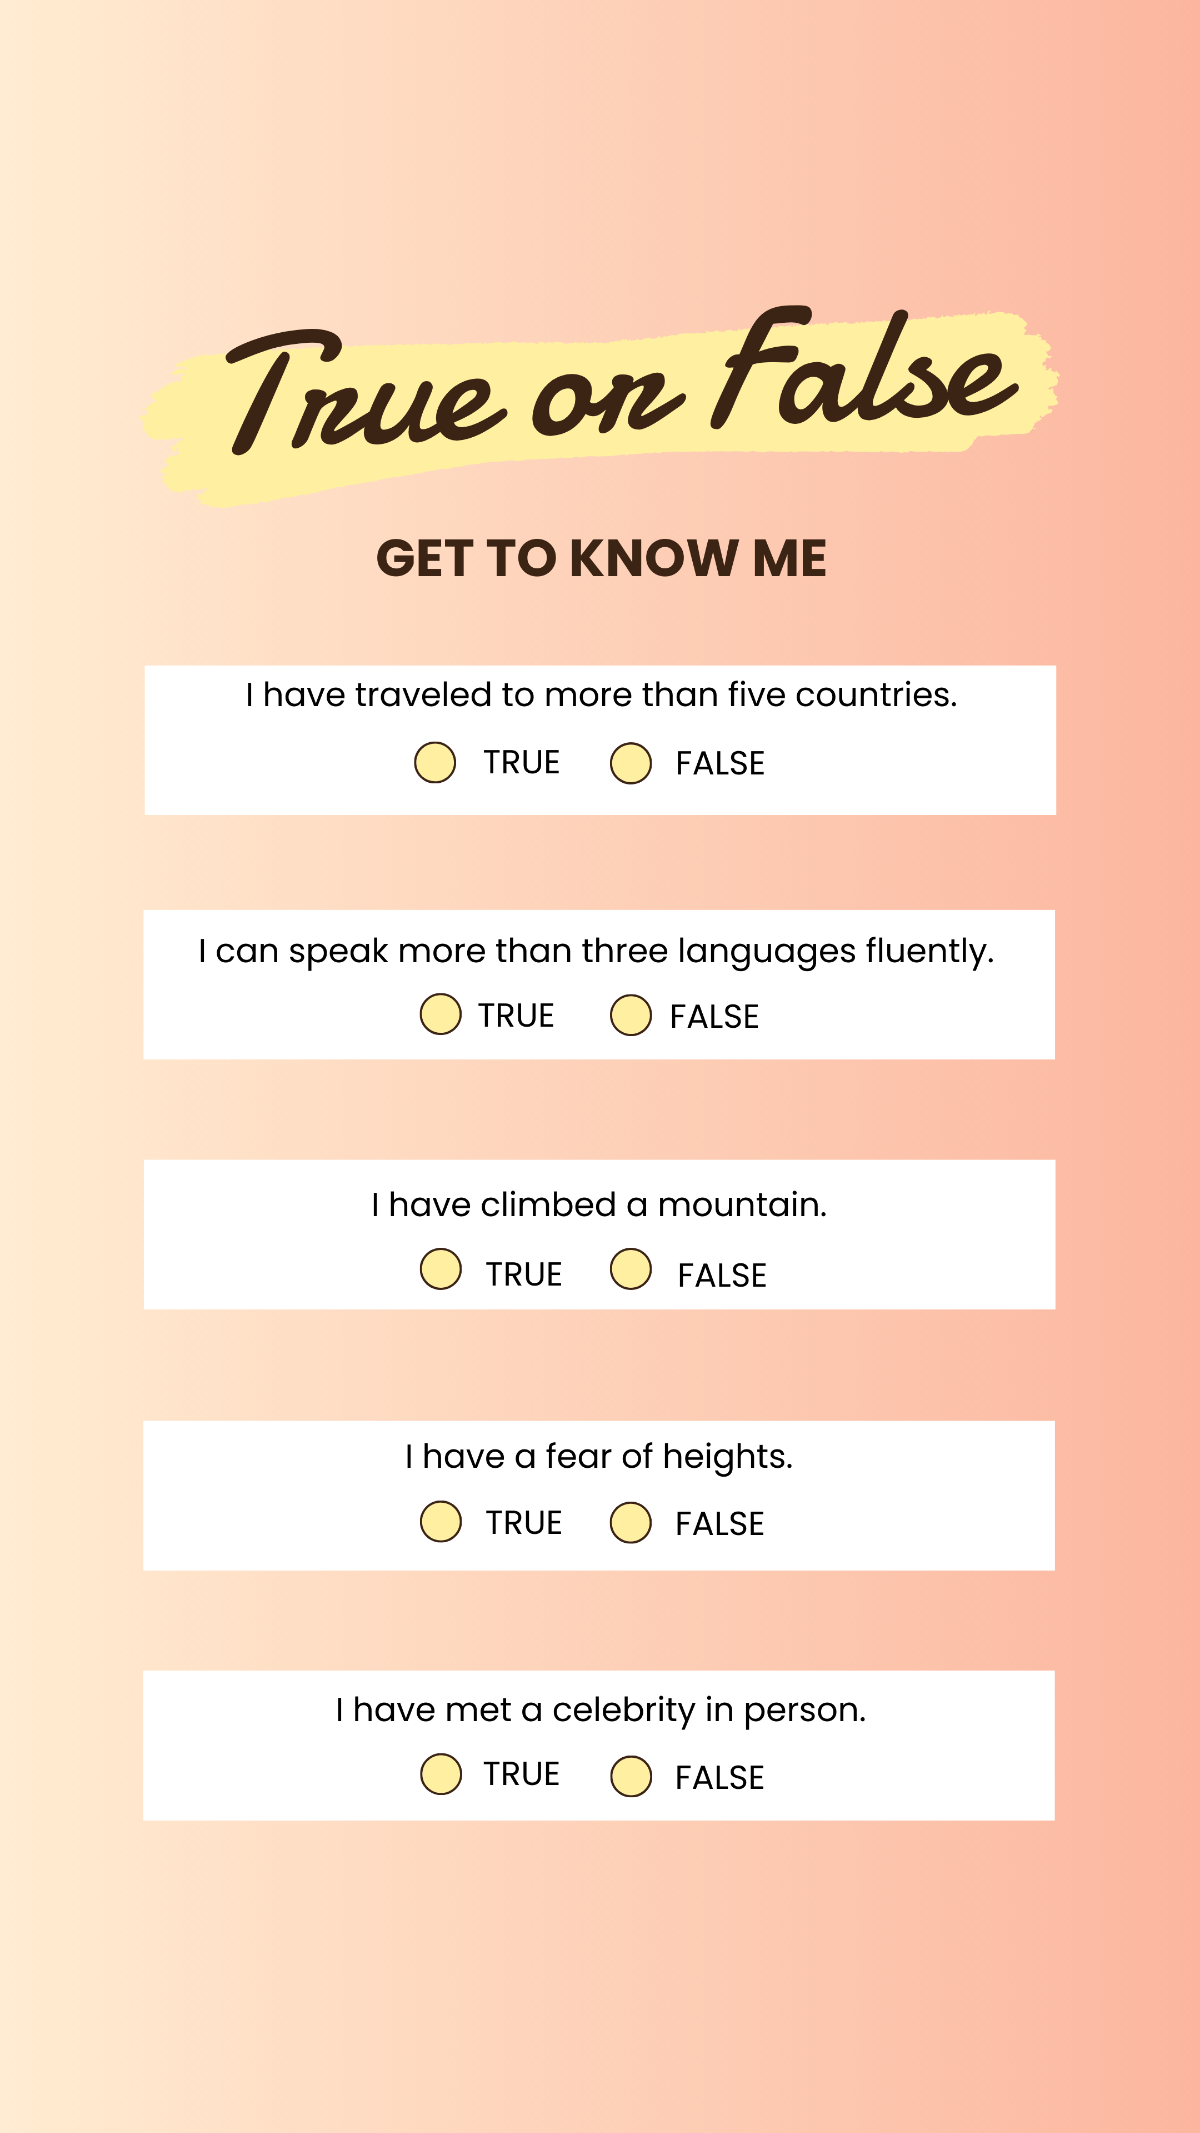 Free True or False Get to Know Me Instagram Story Template